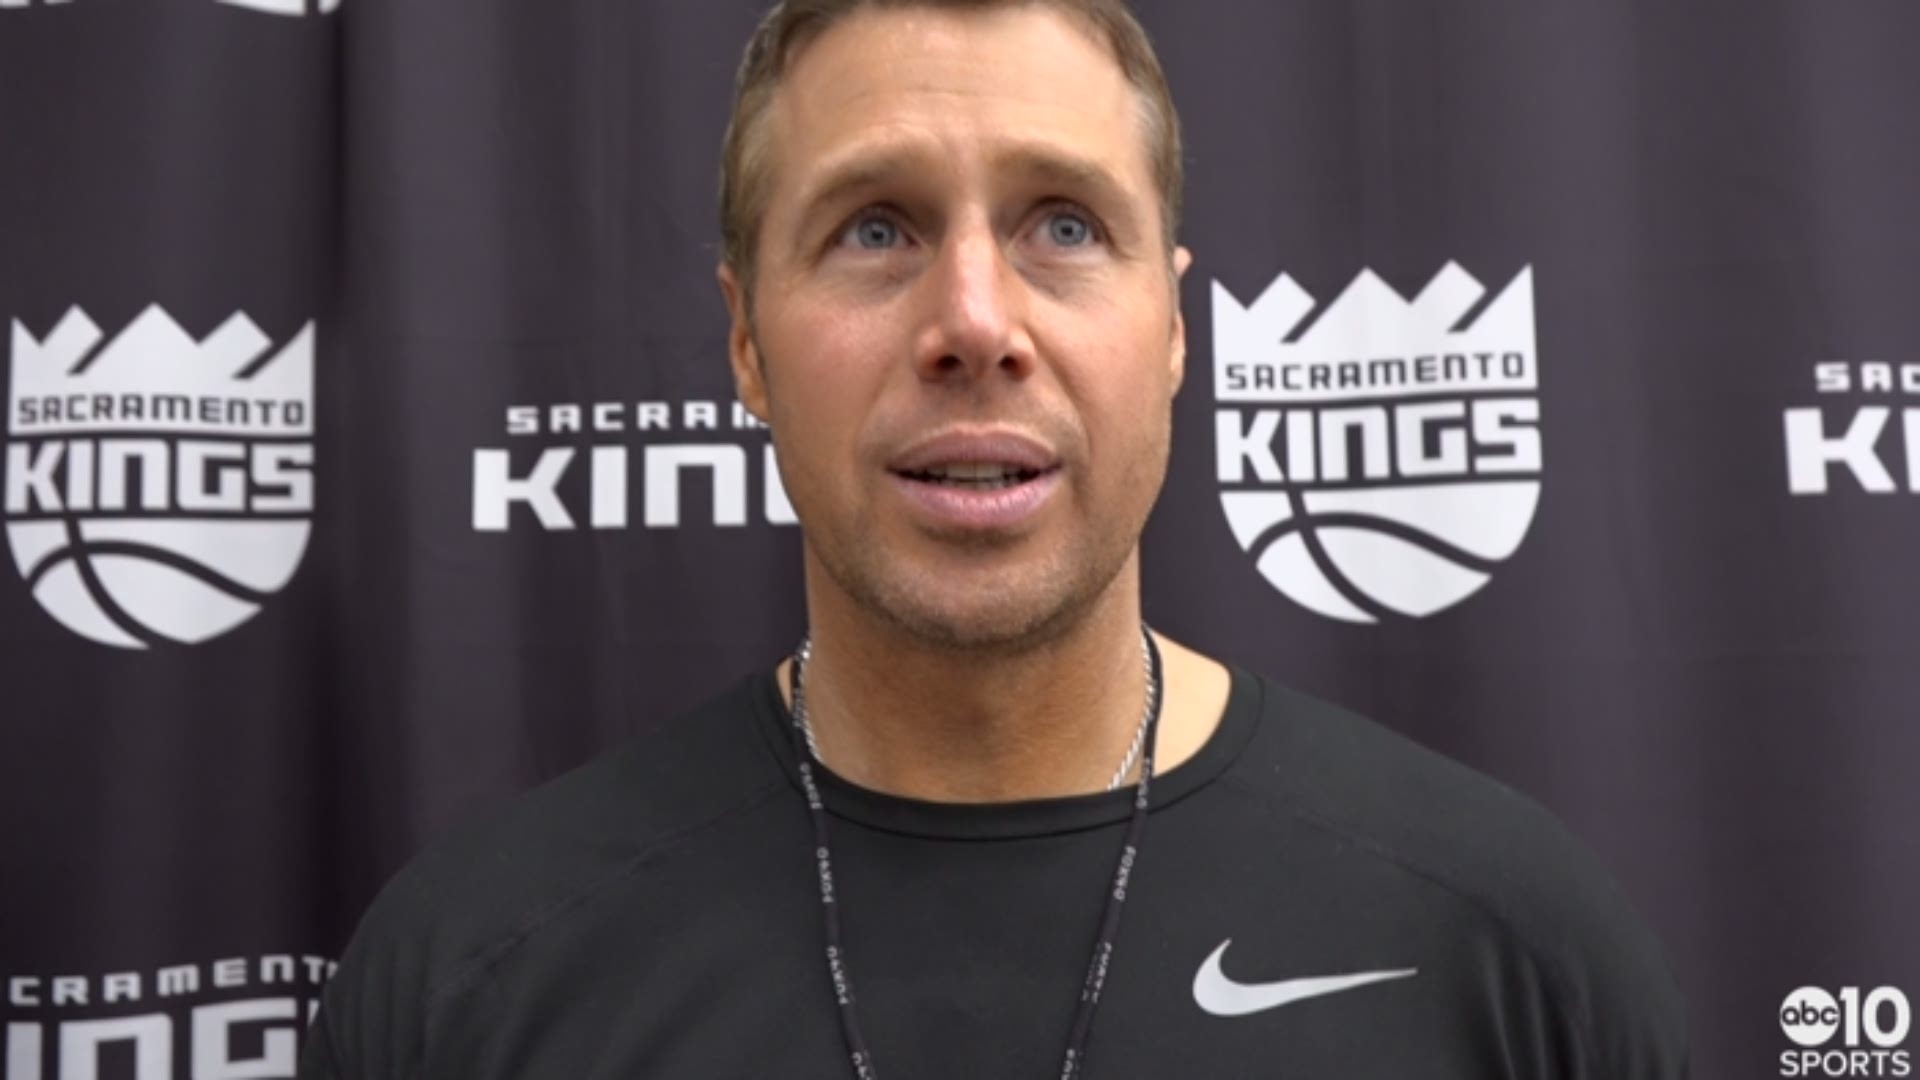 Kings head coach Dave Joerger talks about Monday's long practice session with his team before they embark on a four-game road trip, the status of rookie Marvin Bagley III who is battling back stiffness and the vibe around his team in the wake of Saturday's win over the Indiana Pacers.